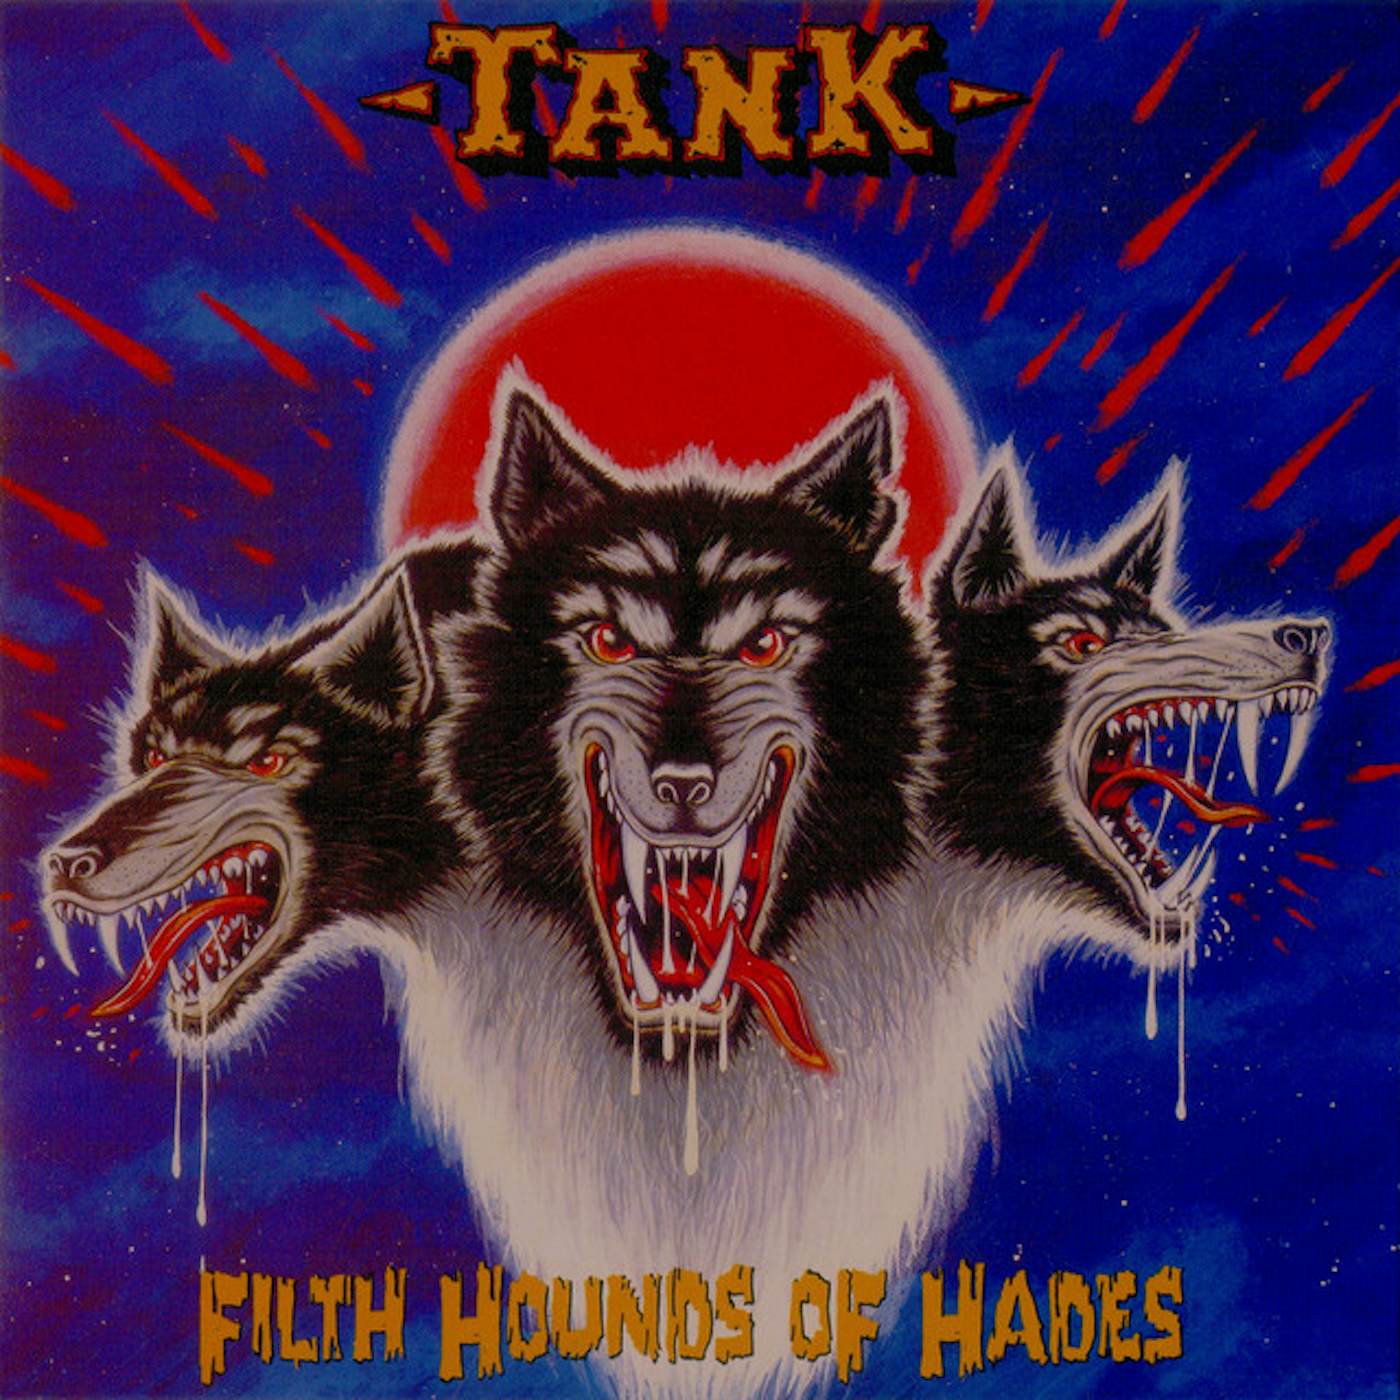 Tank Filth Hounds Of Hades Vinyl Record